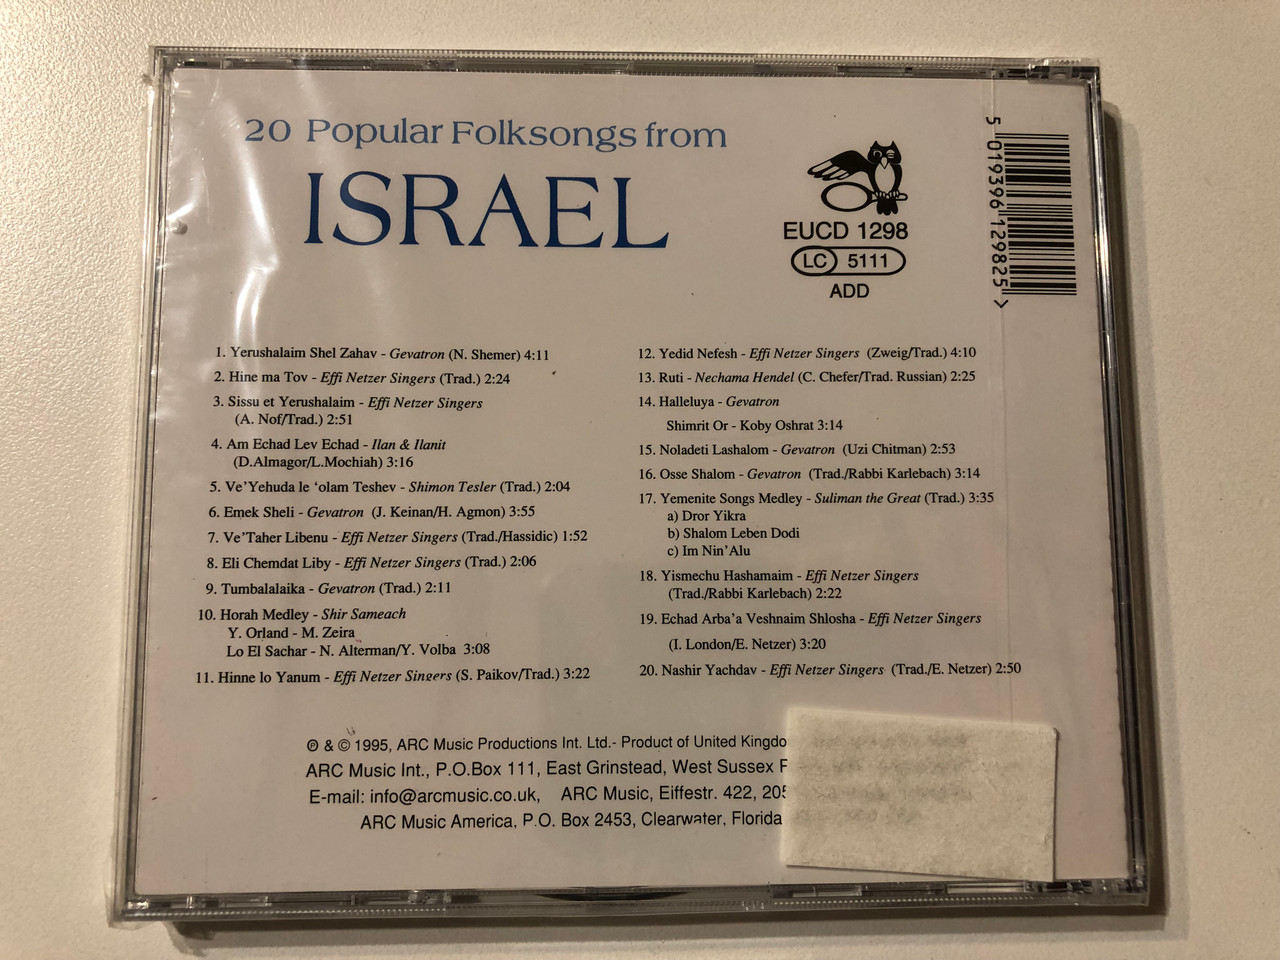 https://cdn11.bigcommerce.com/s-62bdpkt7pb/products/0/images/331868/20_Popular_Folksongs_from_Israel_ARC_Music_Audio_CD_1995_EUCD_1298_2__02845.1713953528.1280.1280.JPG?c=2